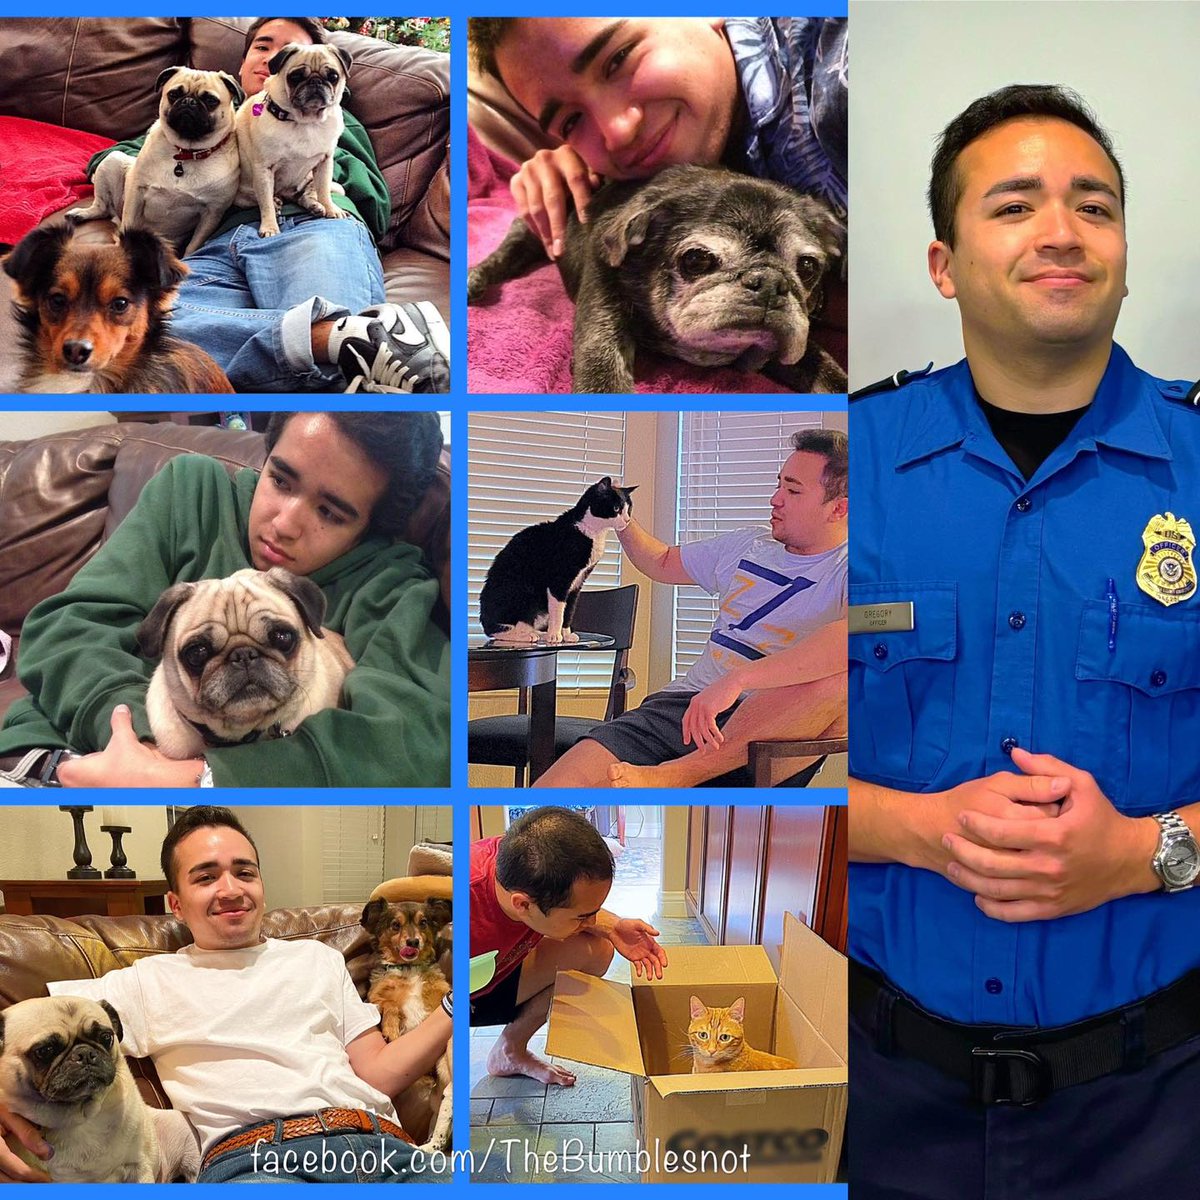 The Bumbleland Birthday Week continues as we wish the happiest of birthdays to The Young Navy Vet (now a TSA officer)! He's loved animals all his life... especially The Bunch.. and we love him so very much. Have the best day ever! 💙💙💙✈️🎉 #birthdayman #happybirthday #weloveyou